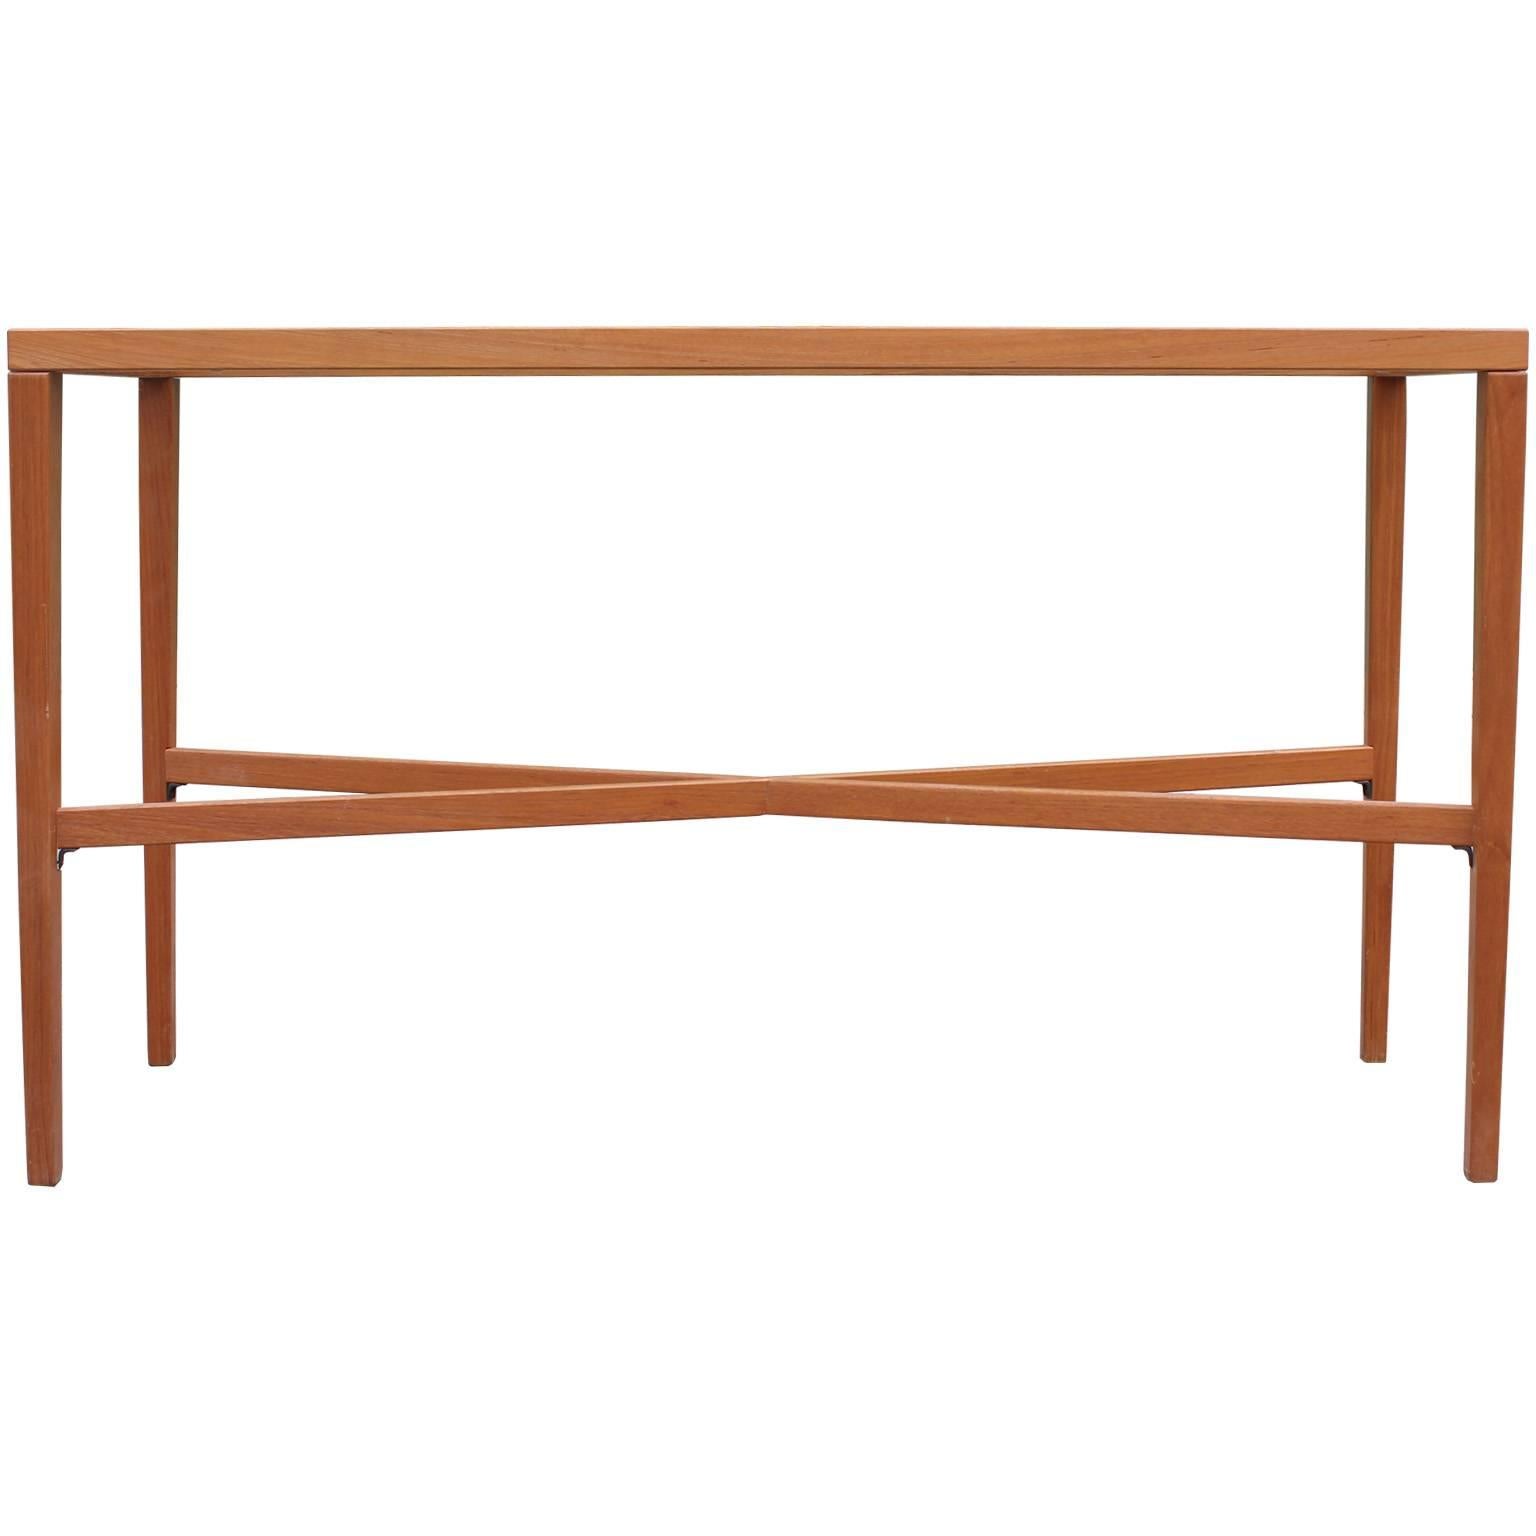 Great delicate Danish teak console with glass top and X stretcher. The table is airy and light perfect against a wall or behind a sofa. In excellent vintage condition.